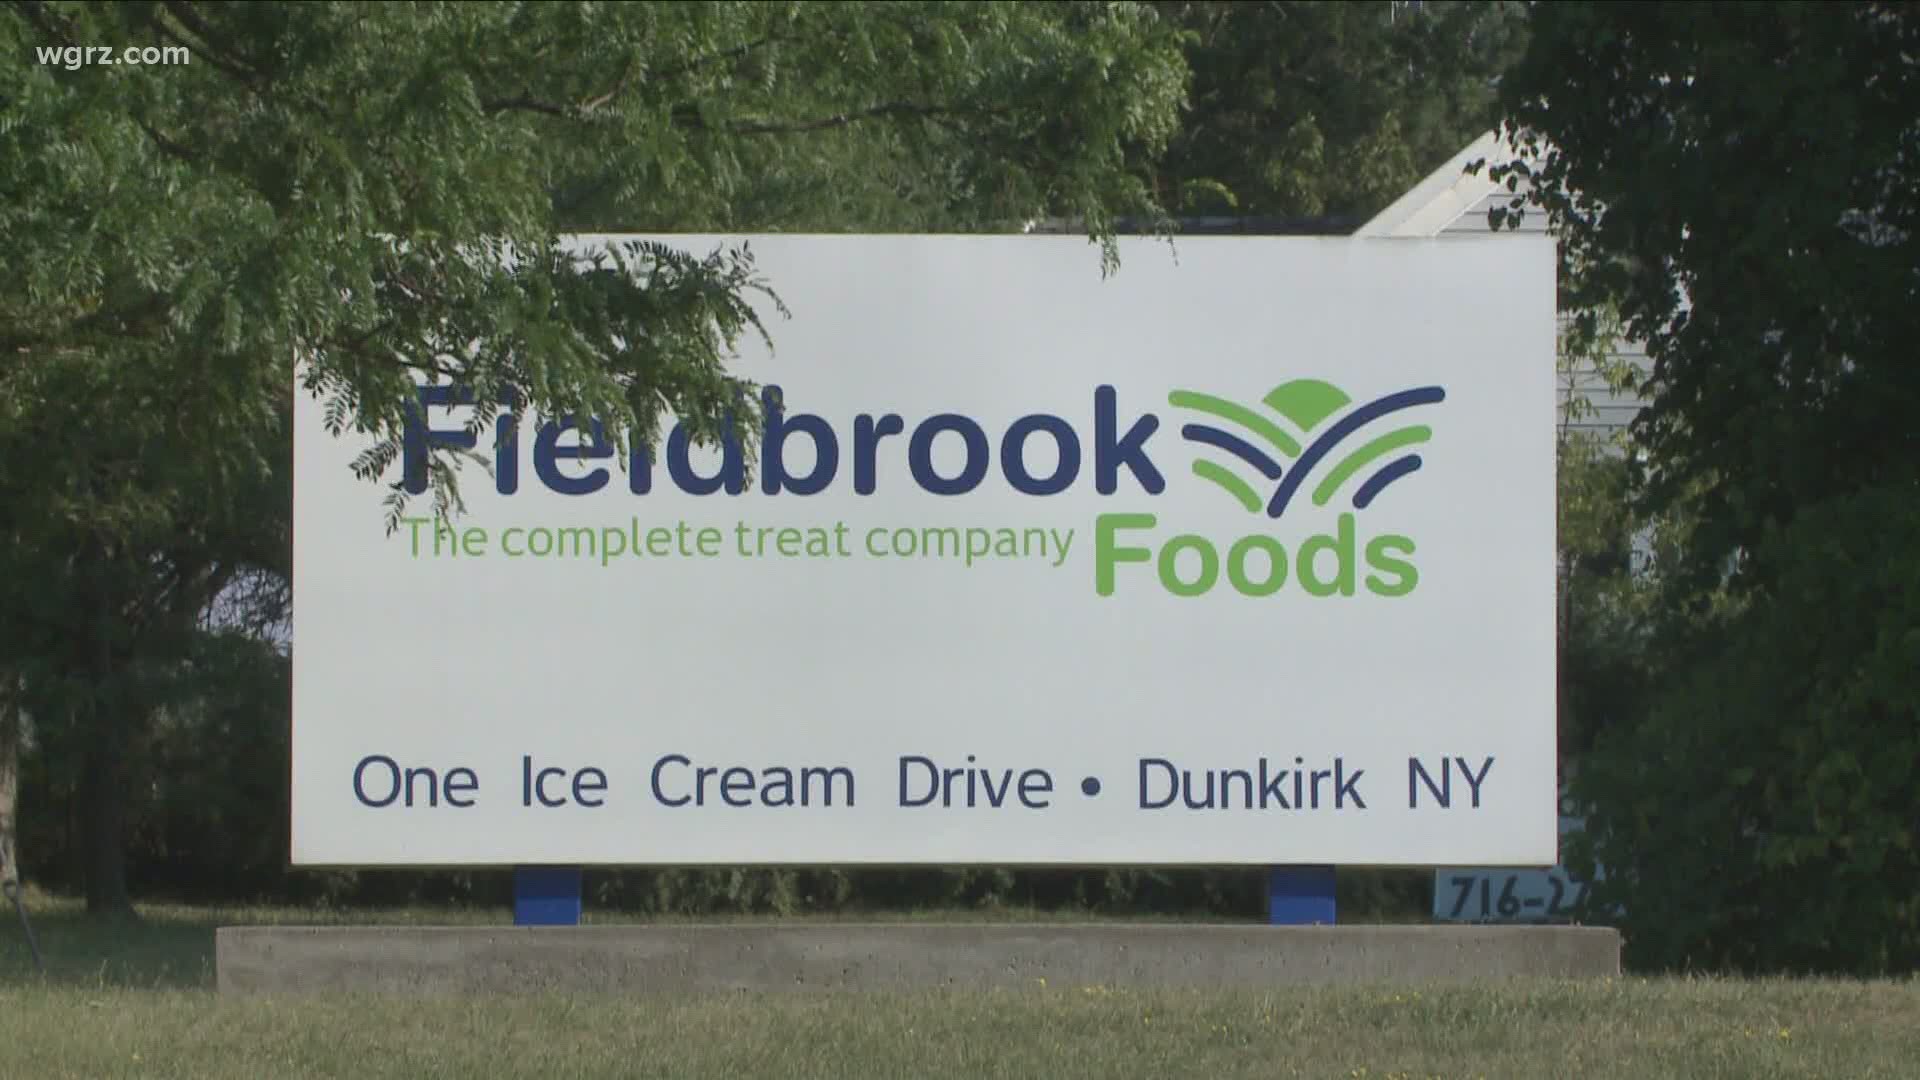 Chautauqua County says that they are seeing a downturn in cases tied to Fieldbrook. Last week, we learned about 63 cases involving employees and their contacts.